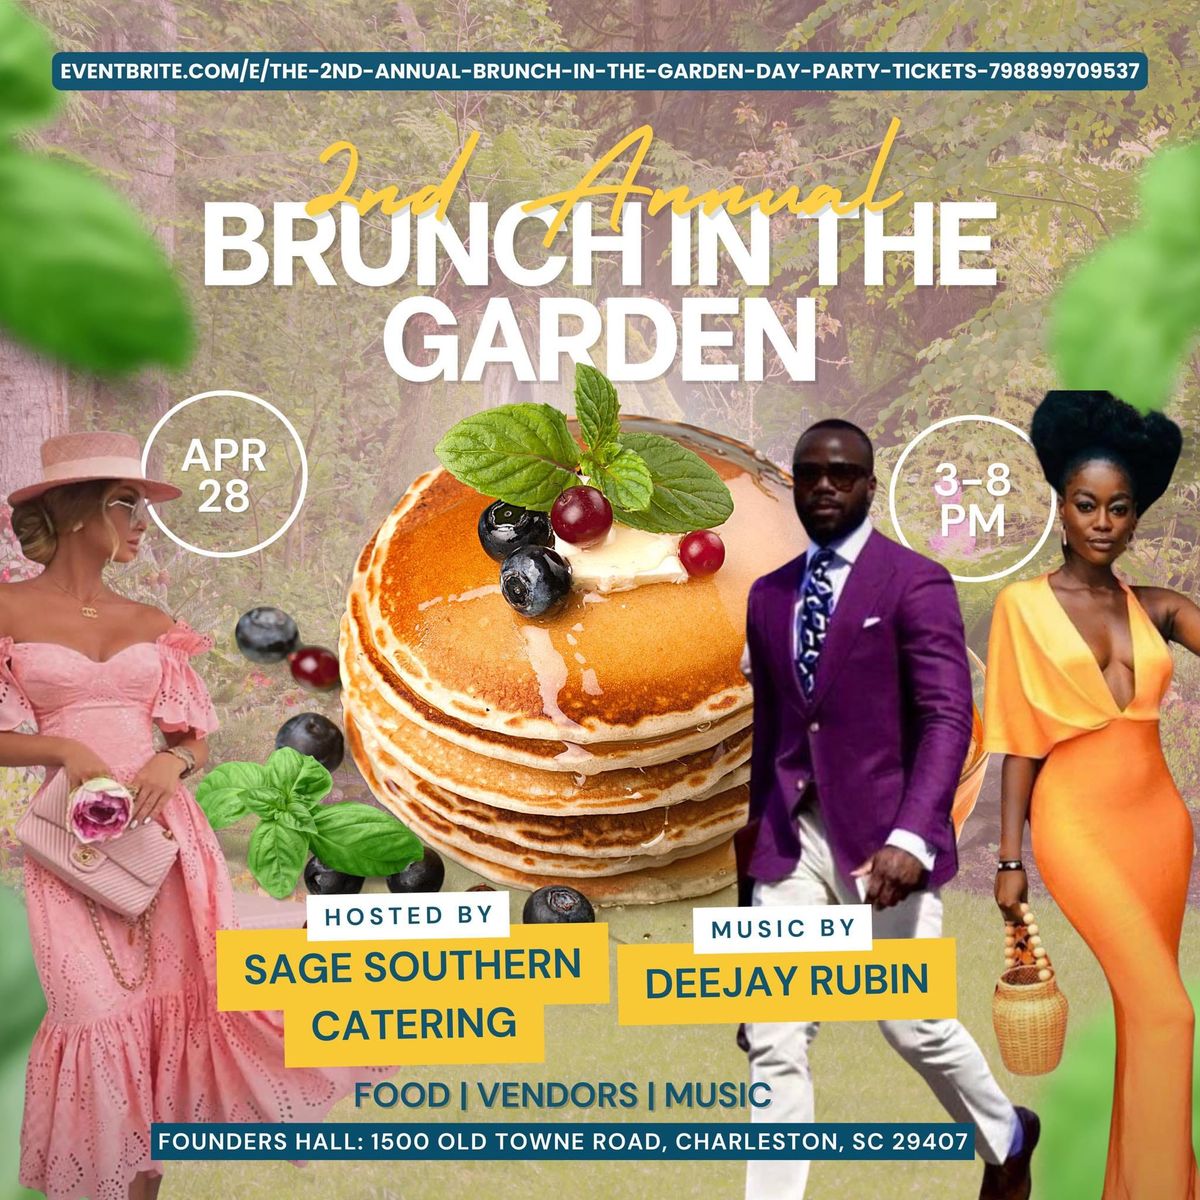 The 2nd Annual "Brunch in the Garden" Day Party 